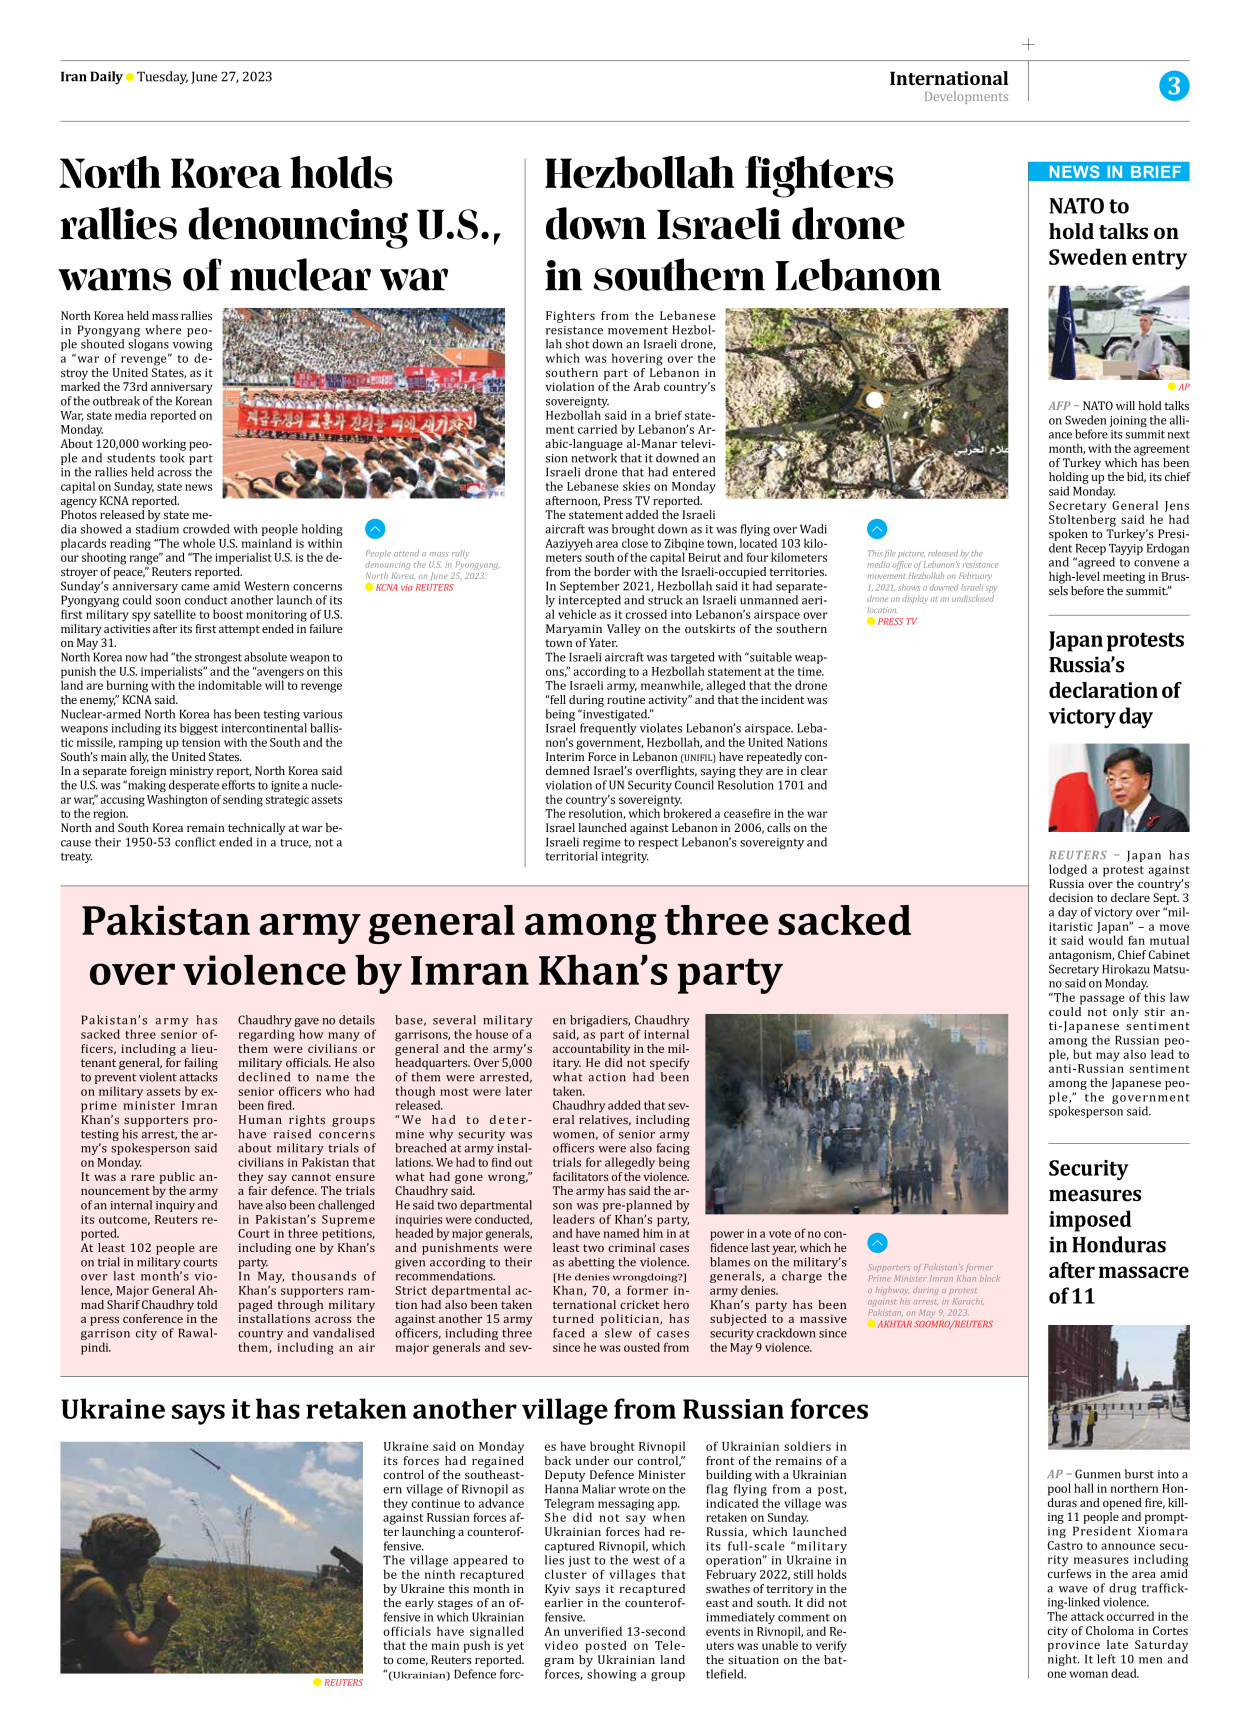 Iran Daily - Number Seven Thousand Three Hundred and Twenty Five - 27 June 2023 - Page 3